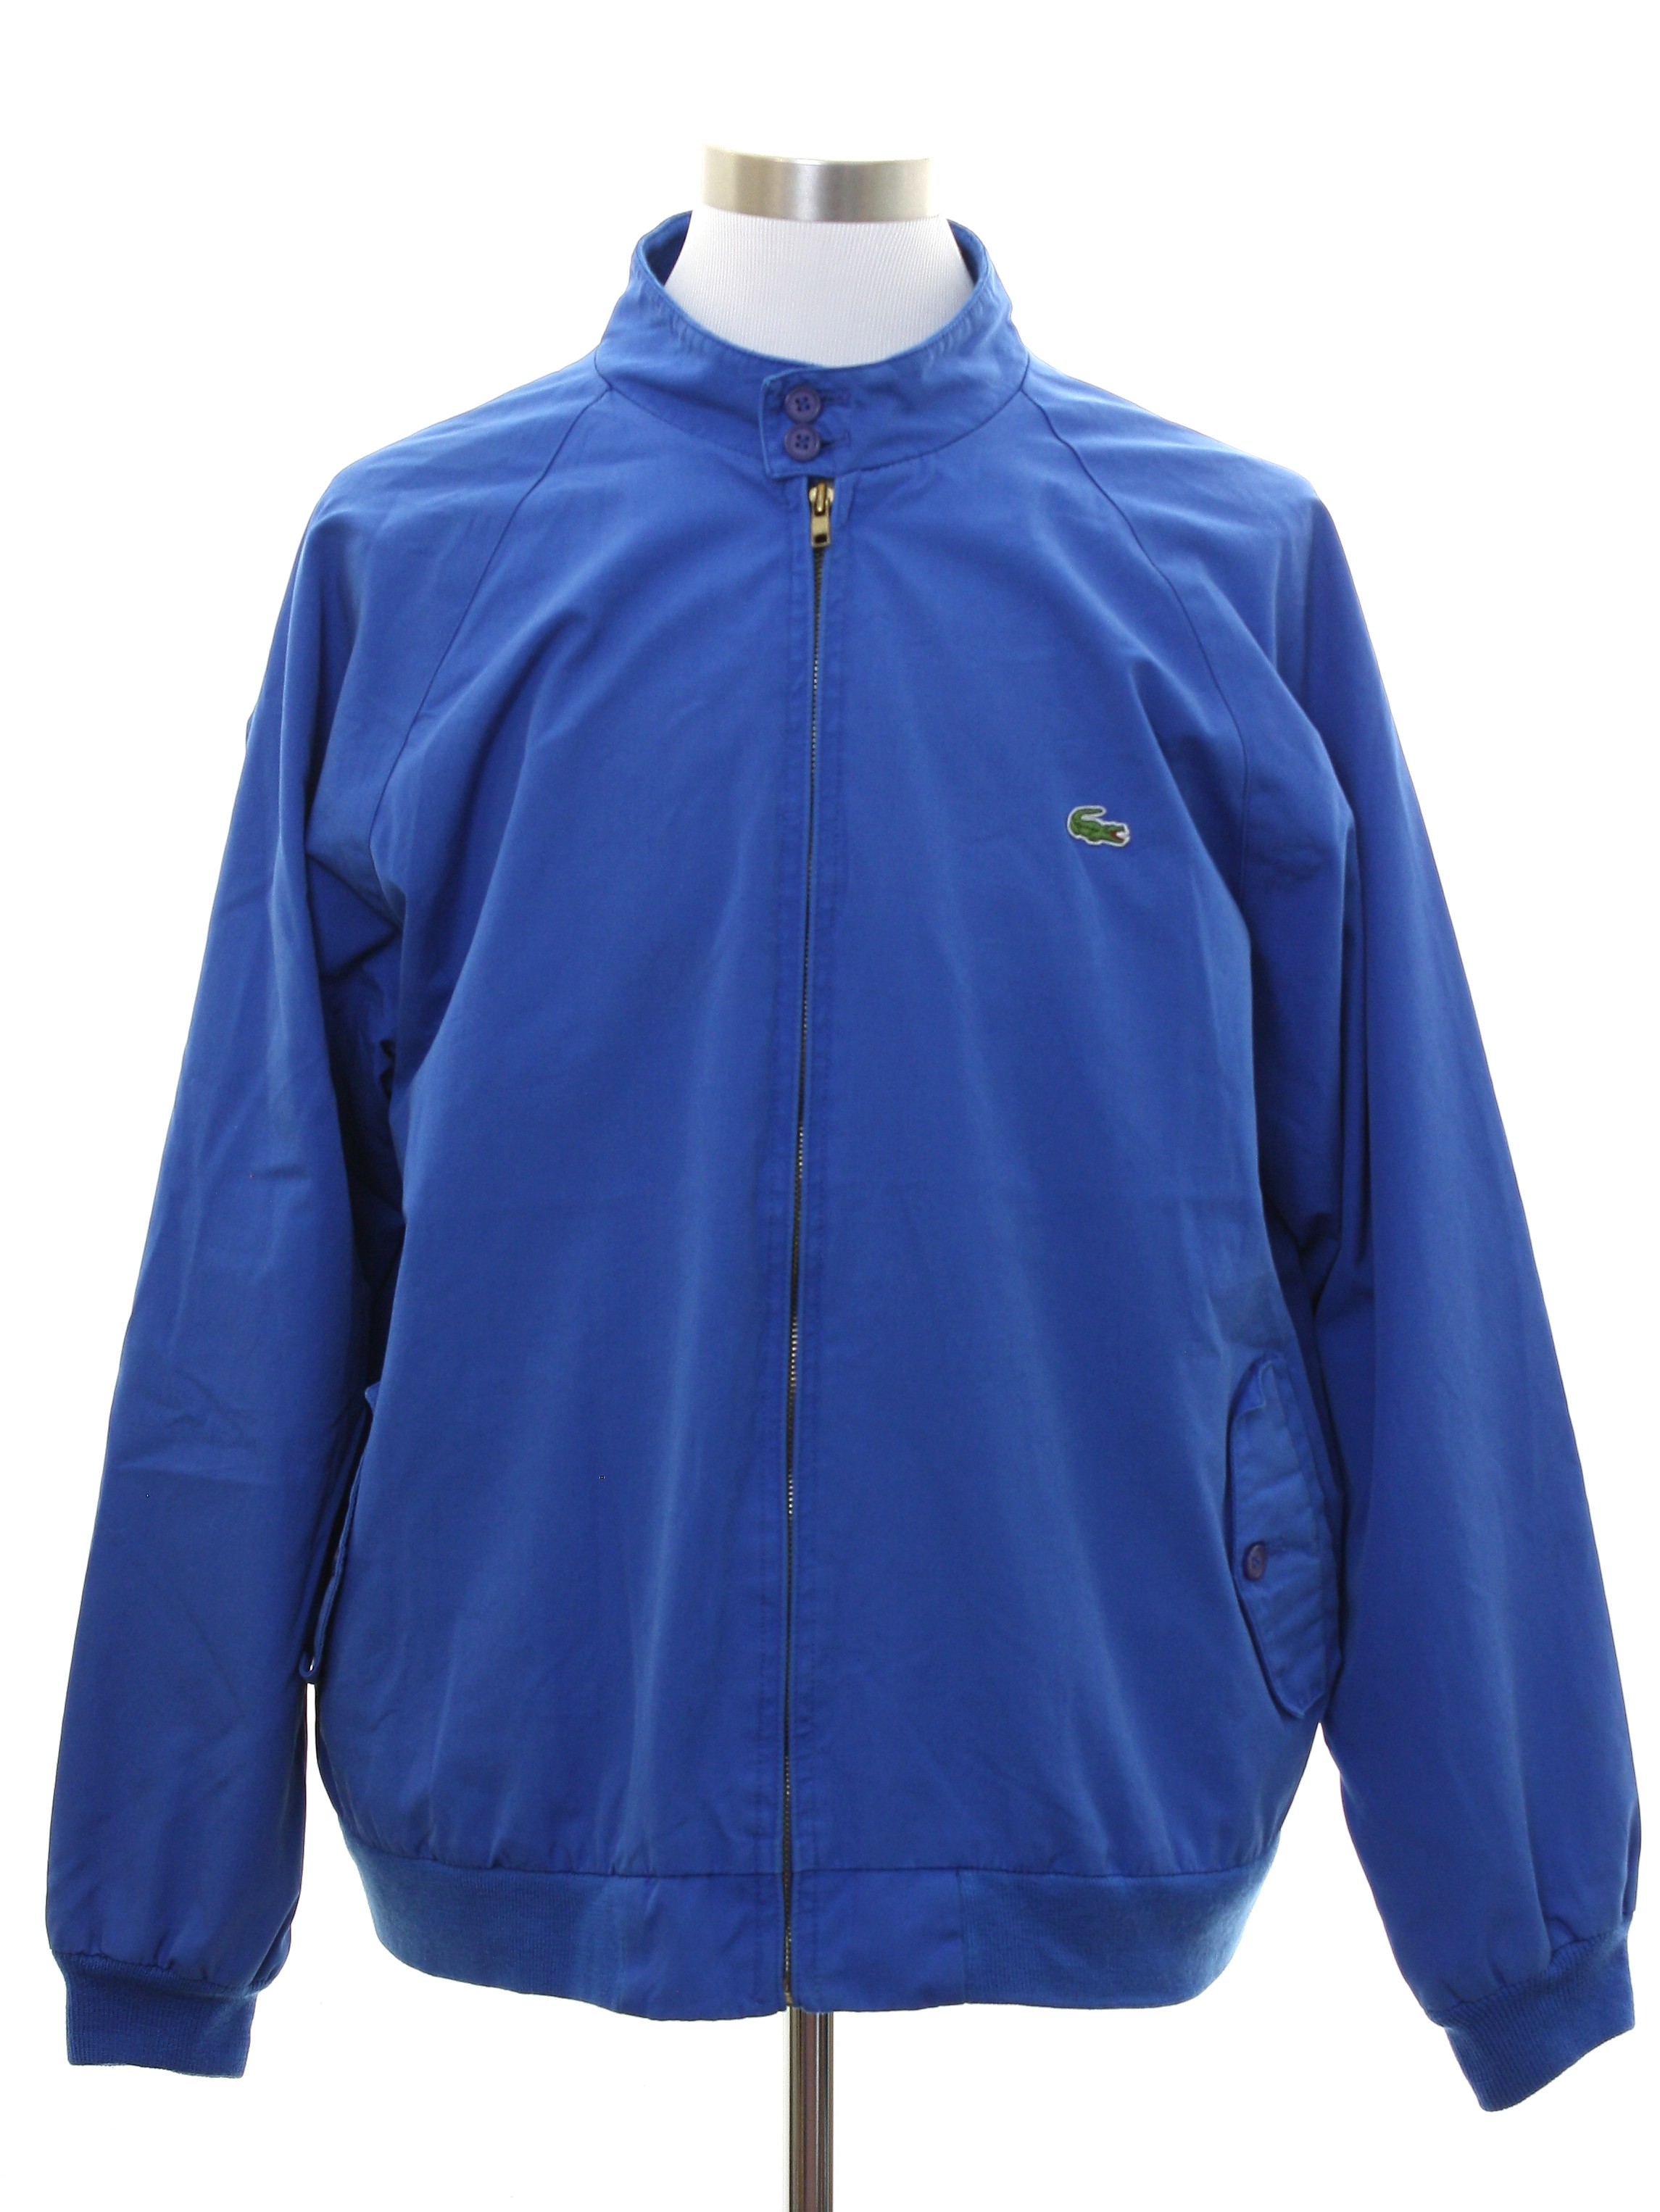 1980s Izod Lacoste Jacket: 80s style (made in 90s) -Izod Lacoste- Mens ...